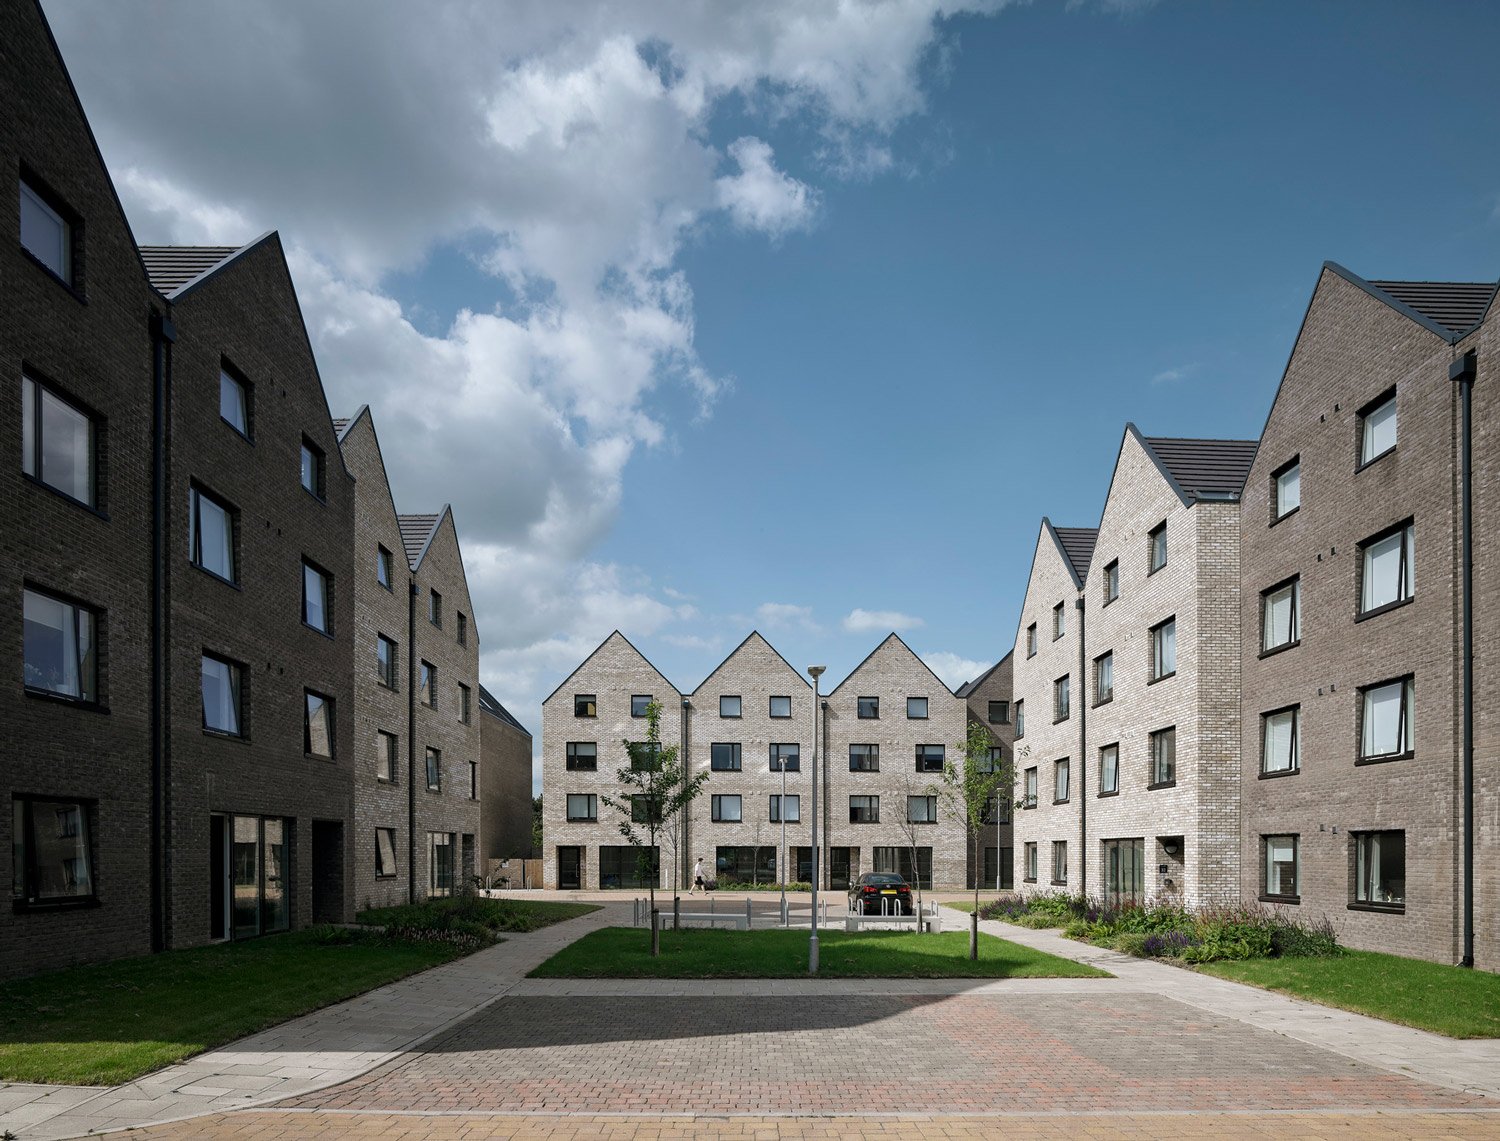 Glasgow-Institute-of-Architects-awards-2021-residential-large-Westwood-Mews-4.jpg